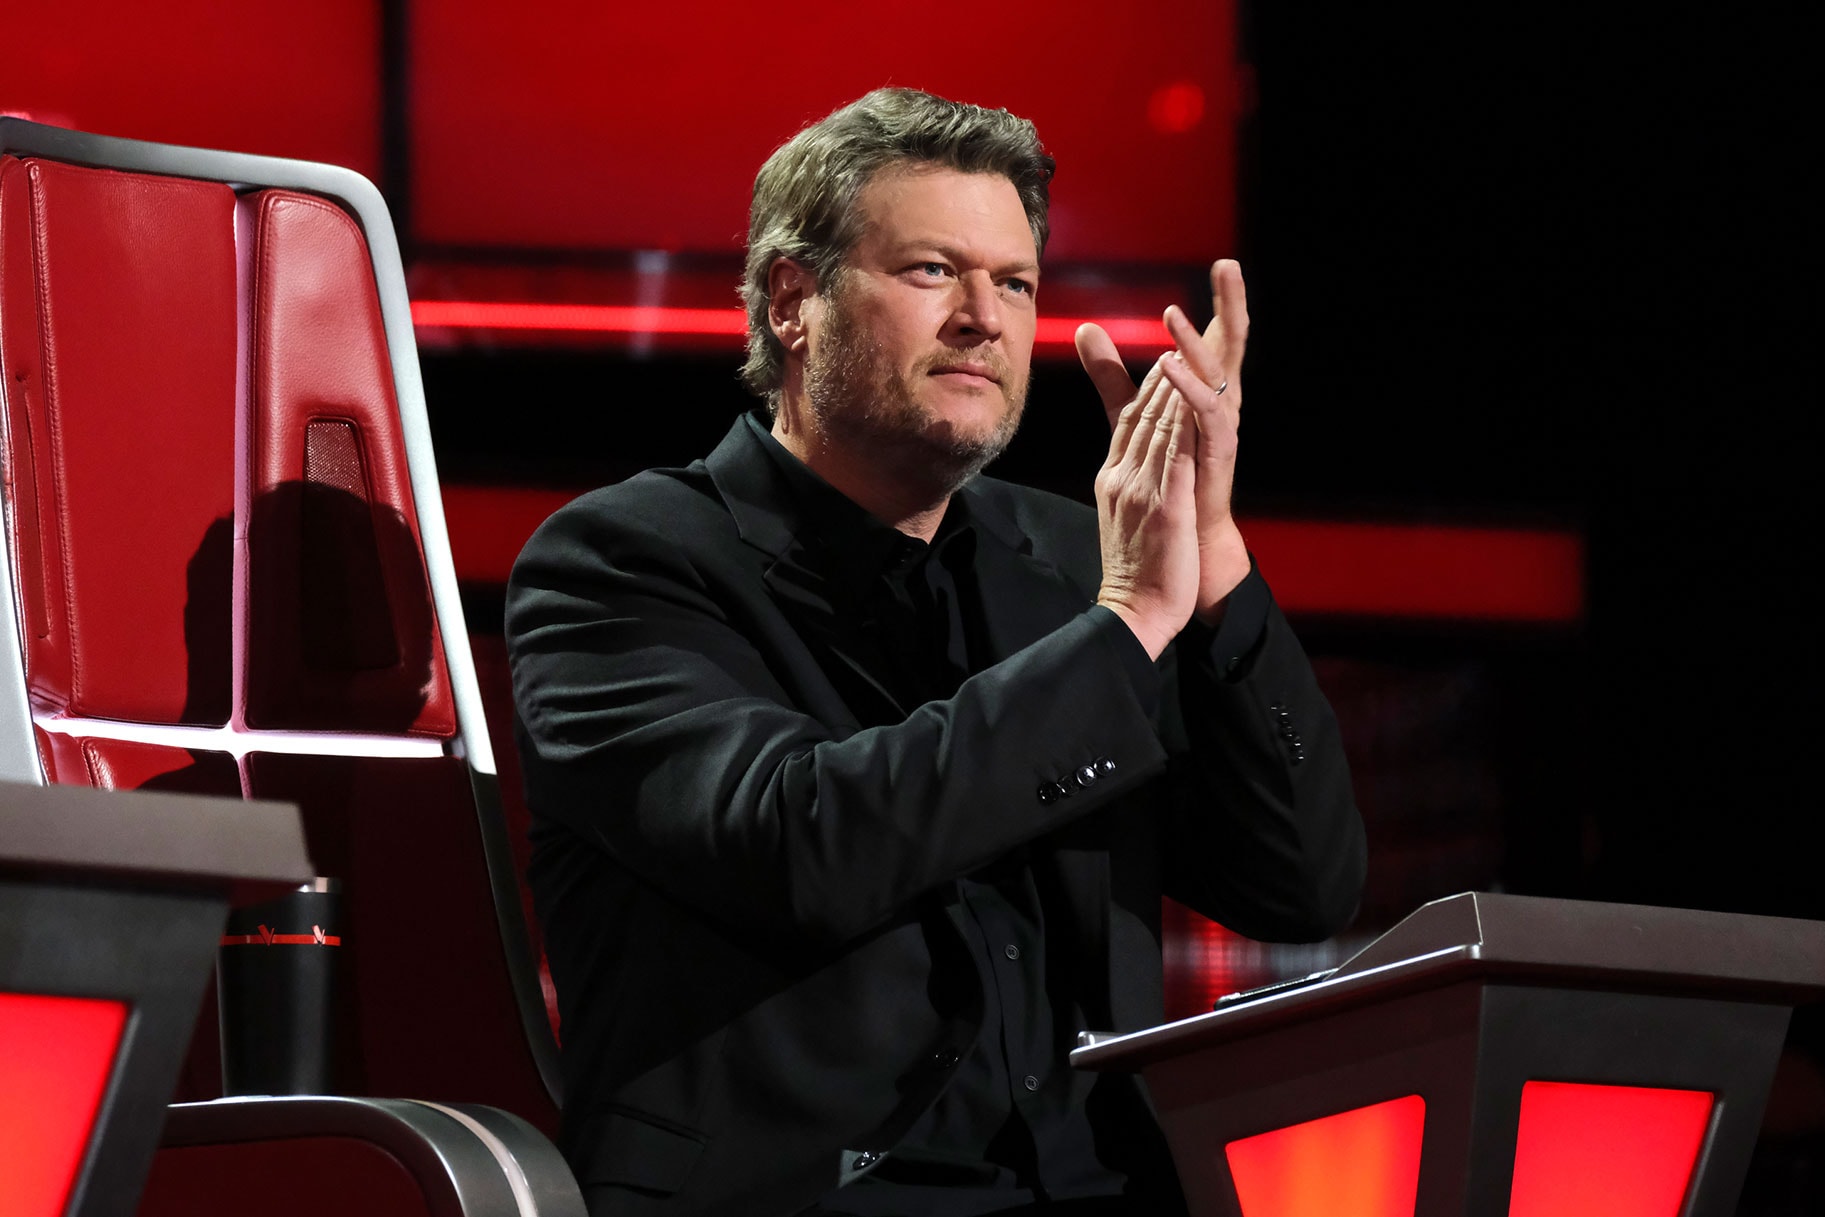 Blake Shelton Teams Up with Kelsea Ballerini for a New Rivalry on The Voice